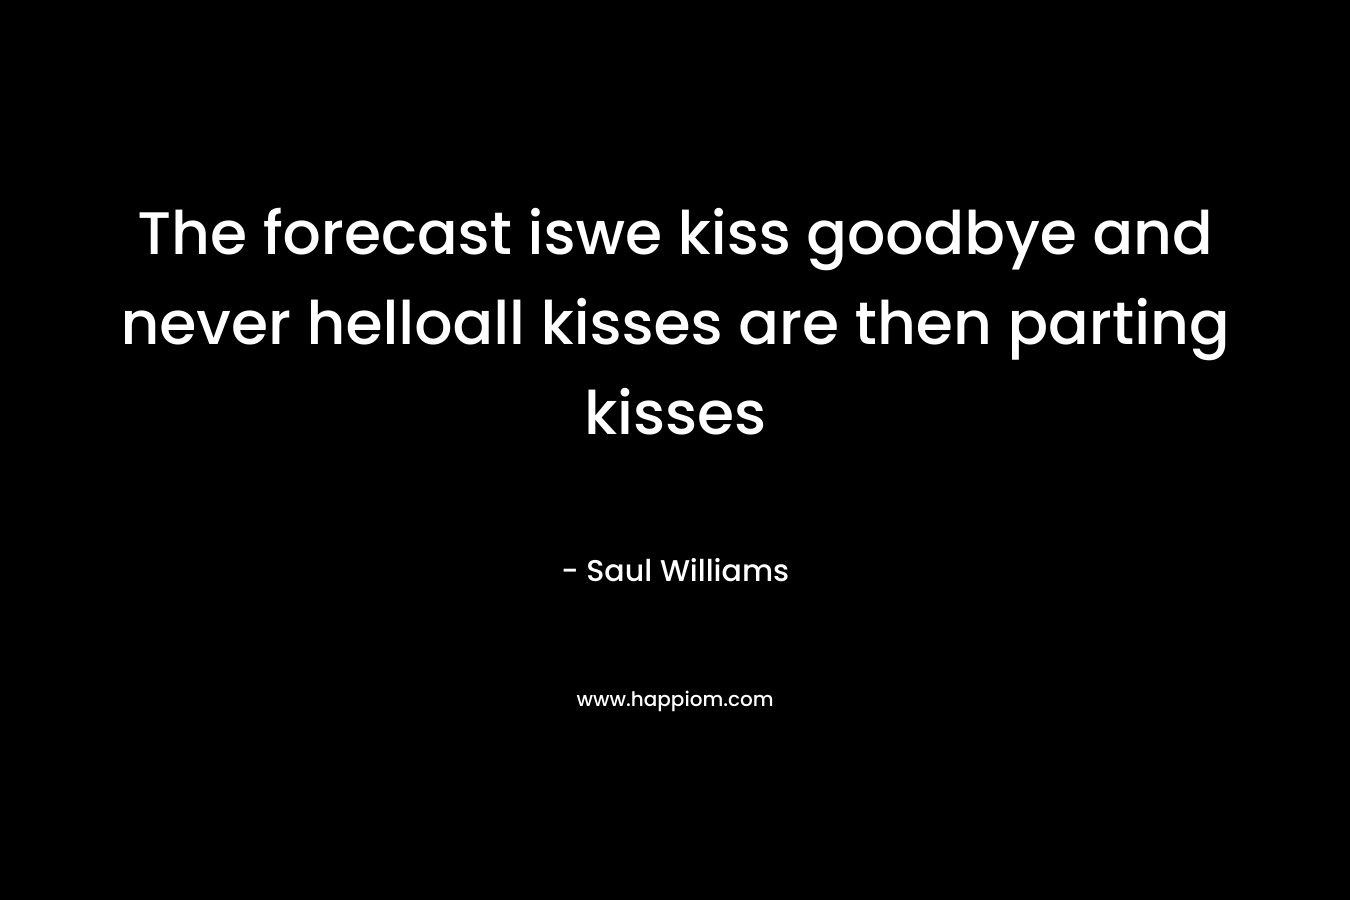 The forecast iswe kiss goodbye and never helloall kisses are then parting kisses